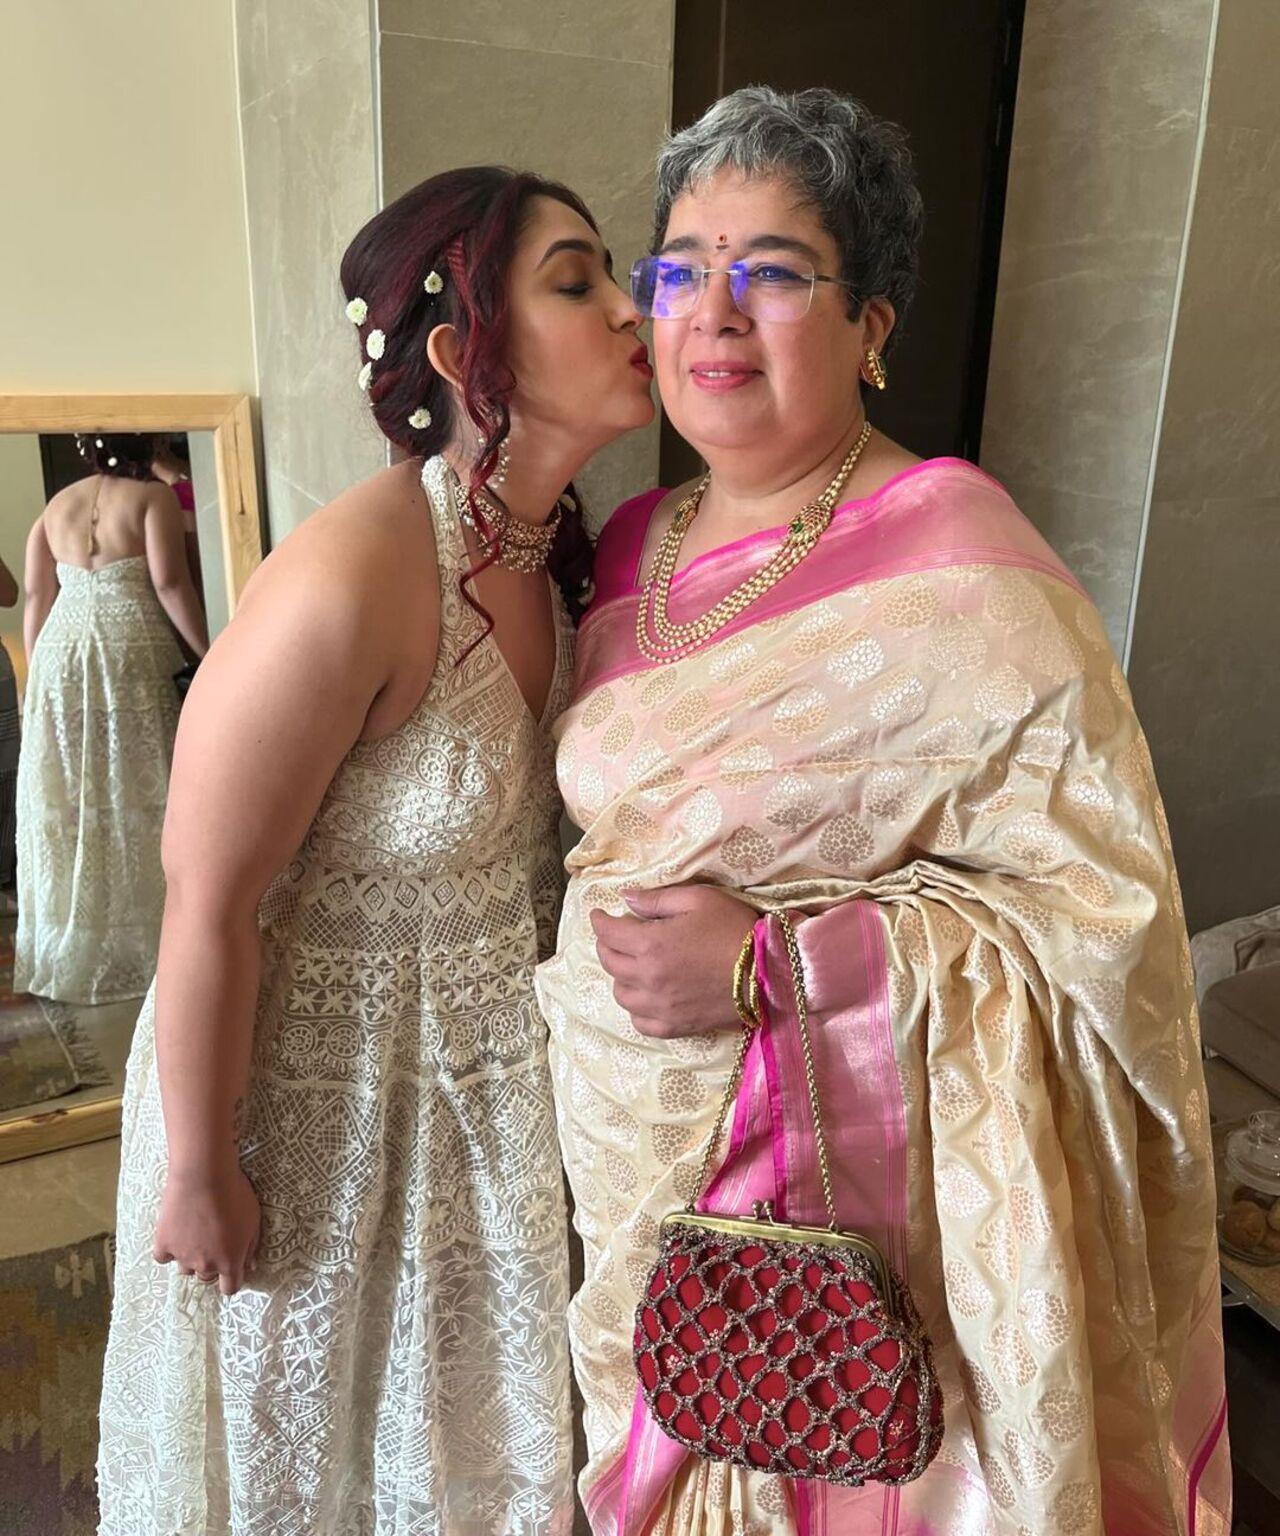 Ira has an adorable moment with her mother Reena Dutta as she plants a kiss on her cheek on her mehendi day